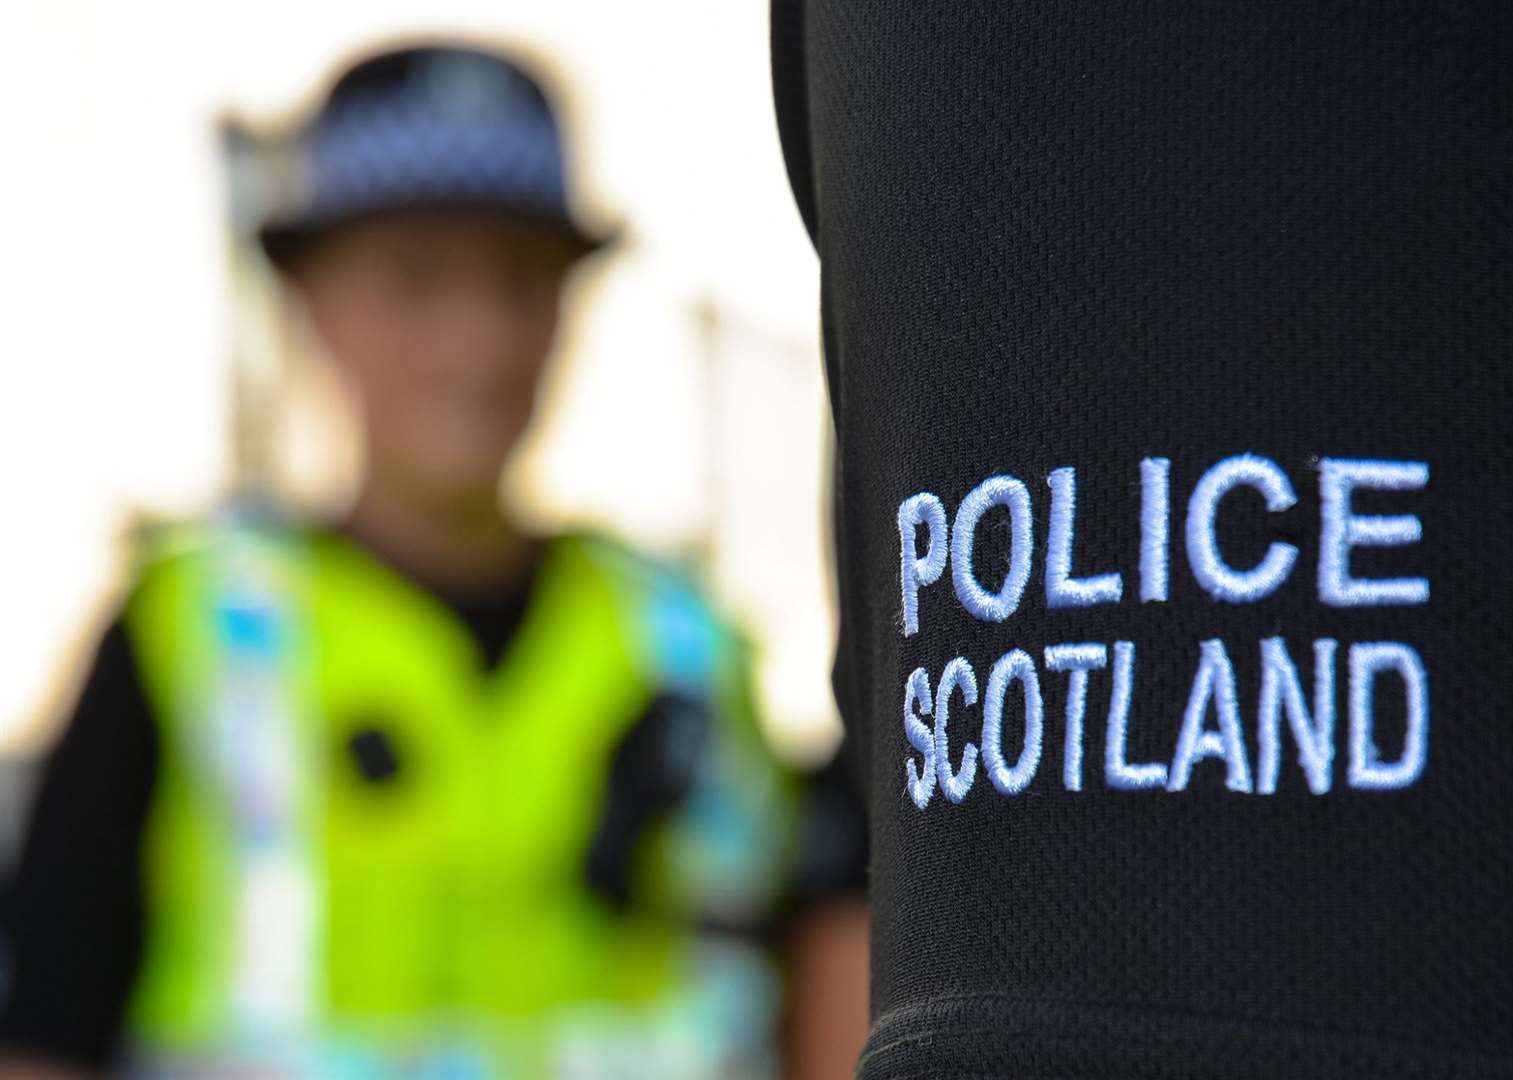 Special constables in the Garioch area have carried out more than 2000 hours of patrols so far this year.